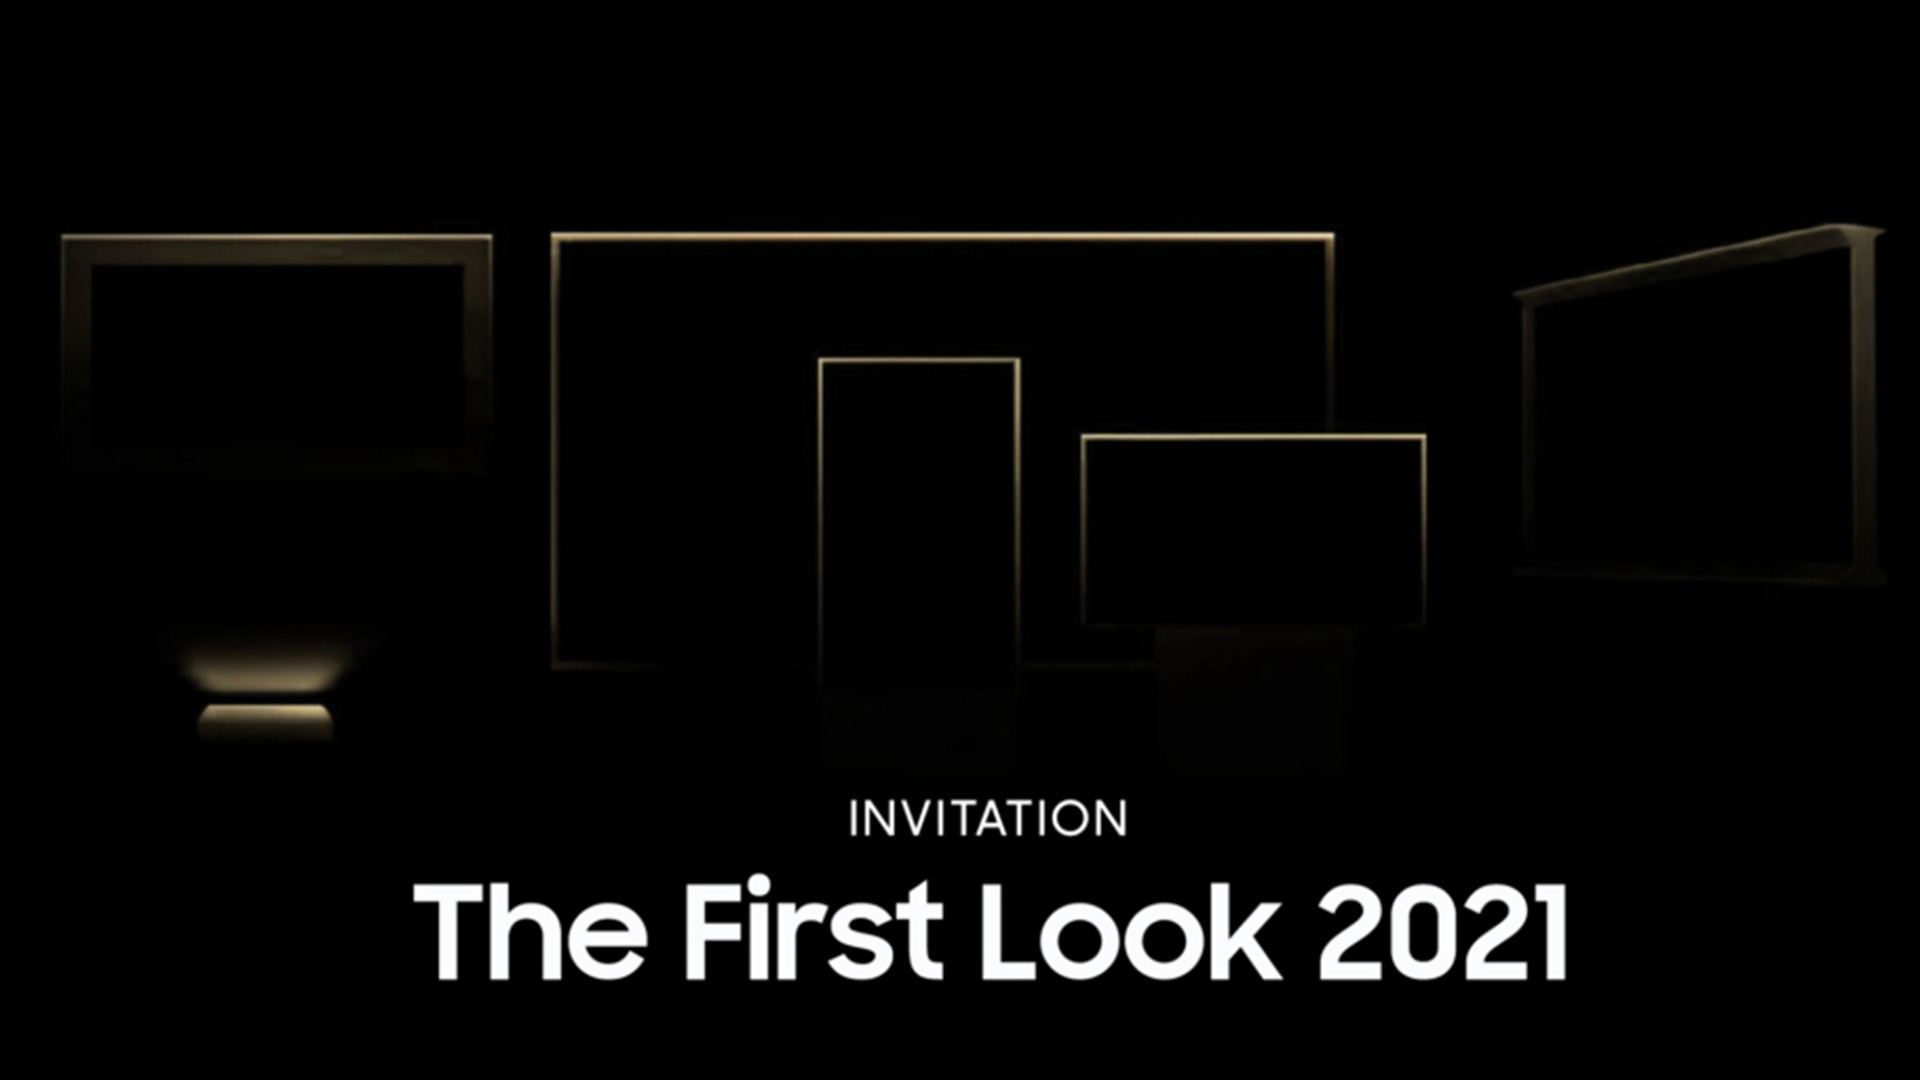 samsung display first look 2021 event